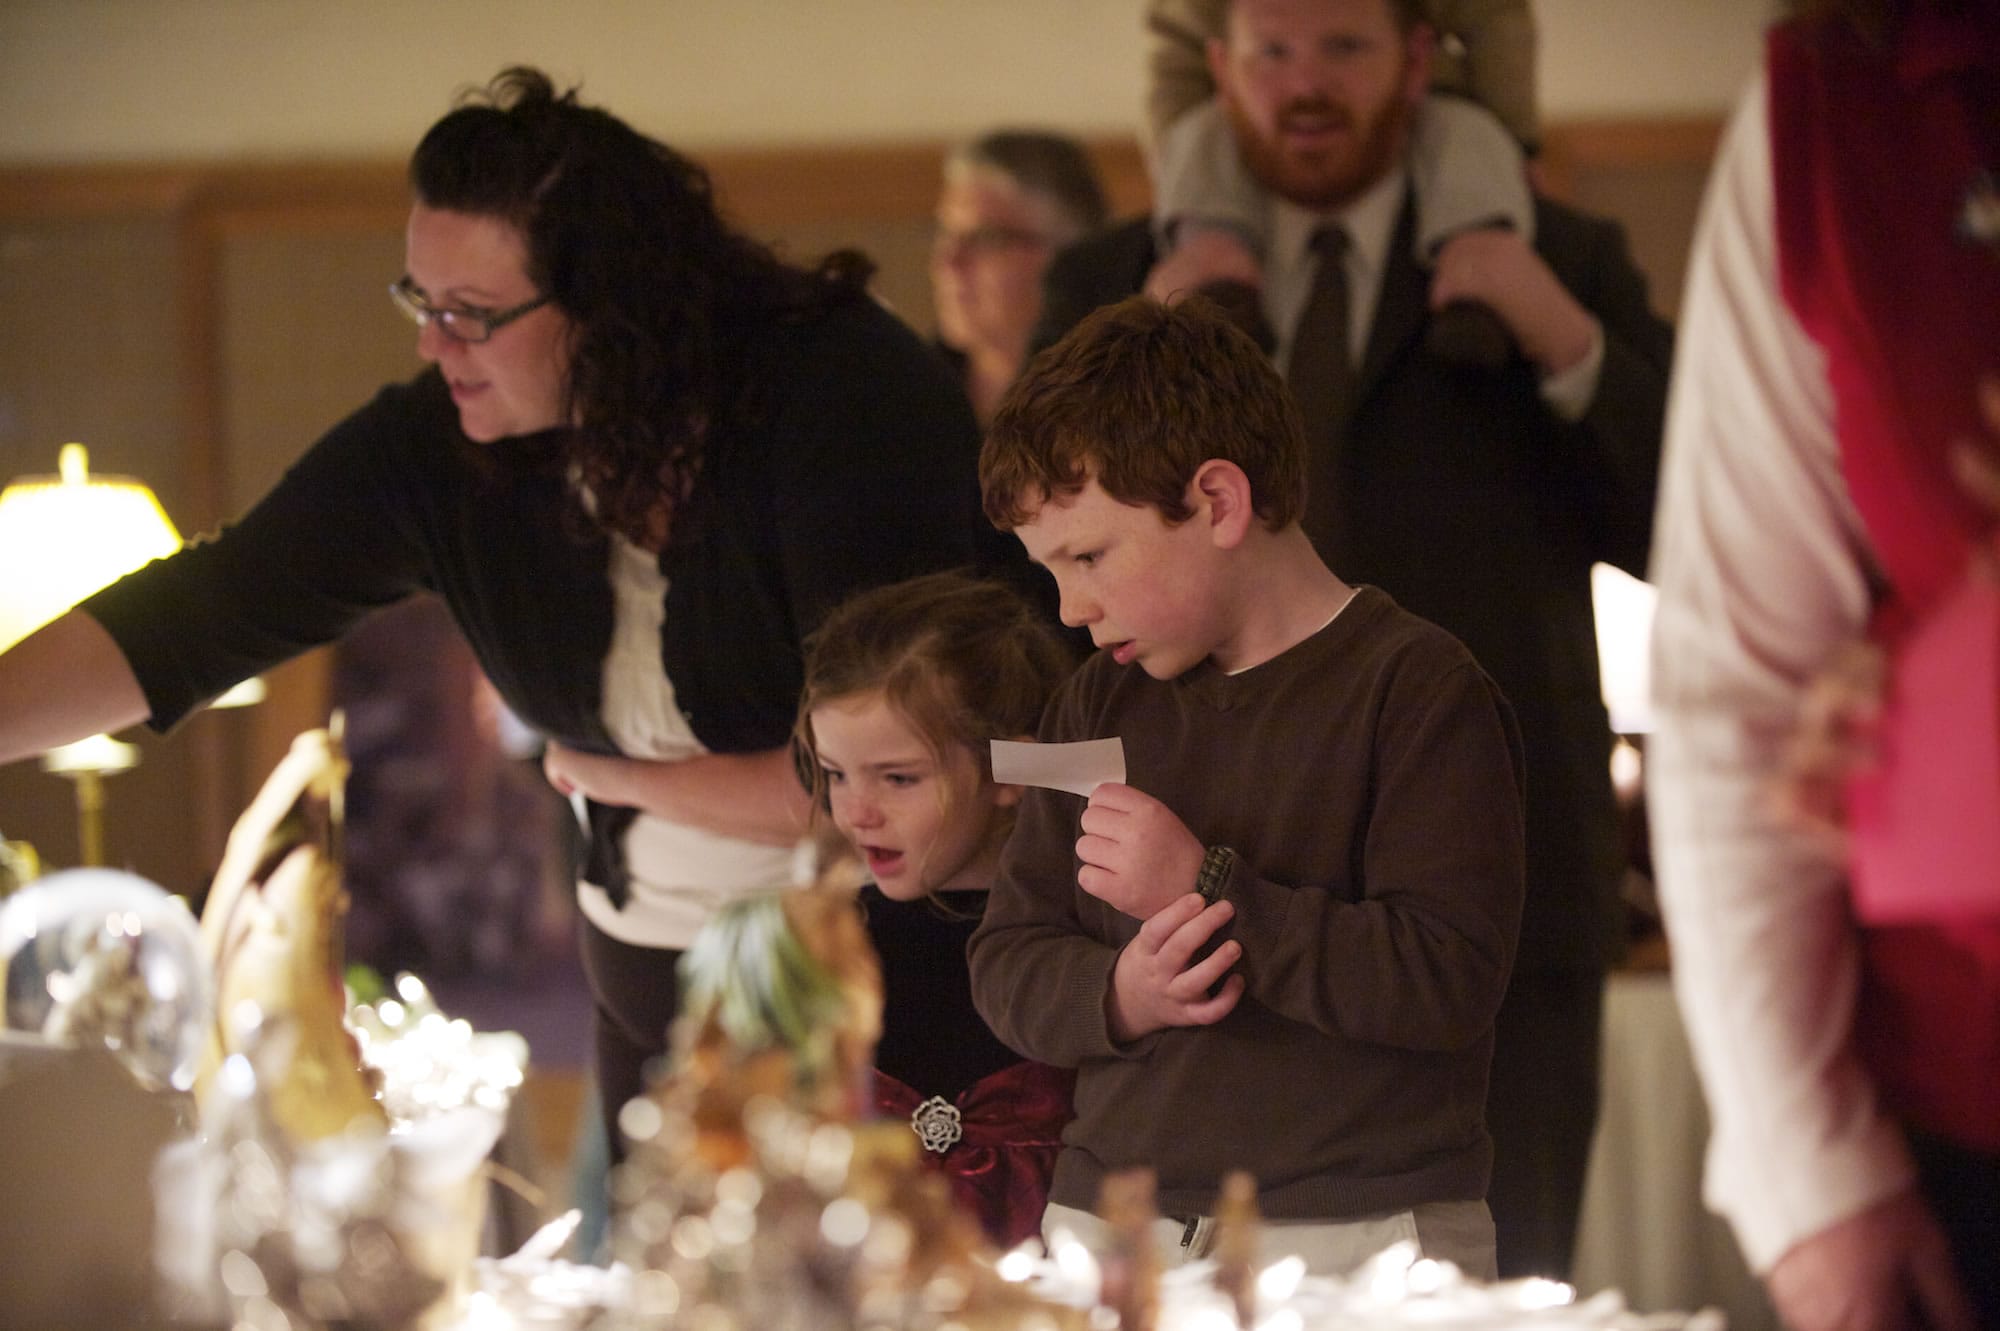 Collin Horrocks, 7, his sister, Hadley Horrocks, 4, and their mom, Katie Horrocks, get a close view of a nativity from a foreign land on Sunday at The Church of Jesus Christ of Latter-day Saints in east Vancouver.